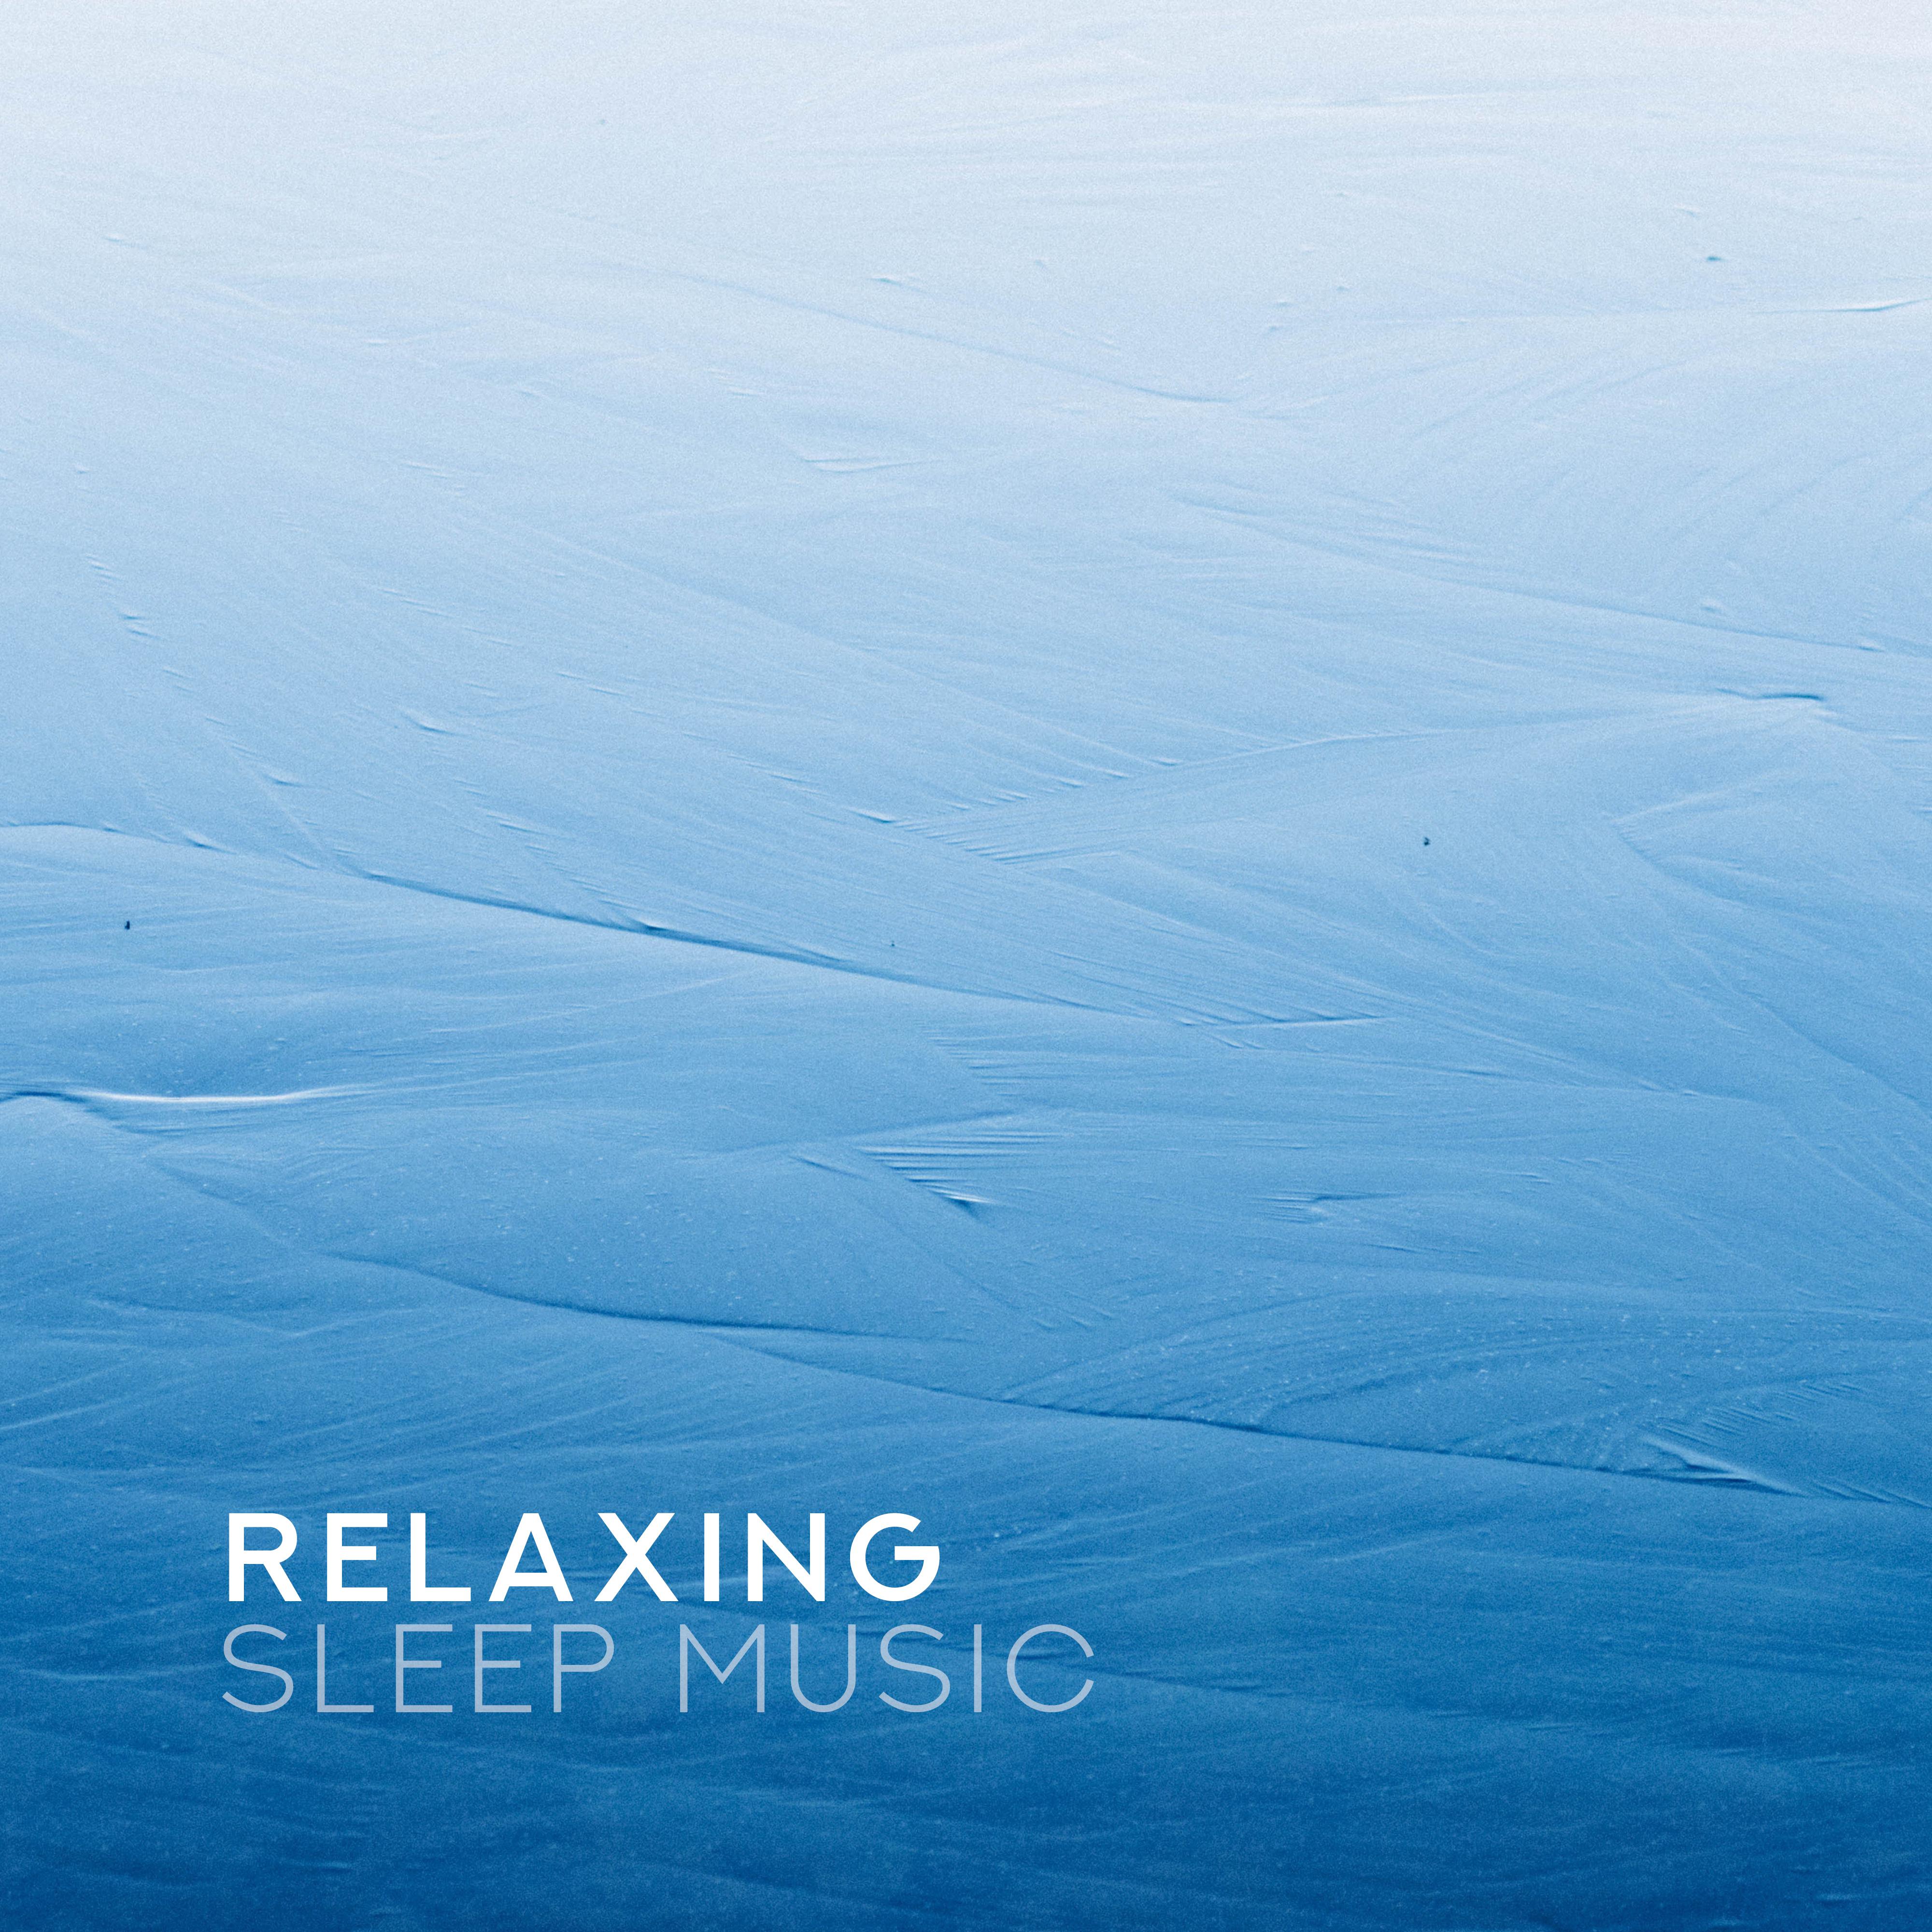 Relaxing Sleep Music (Waterscapes Series)